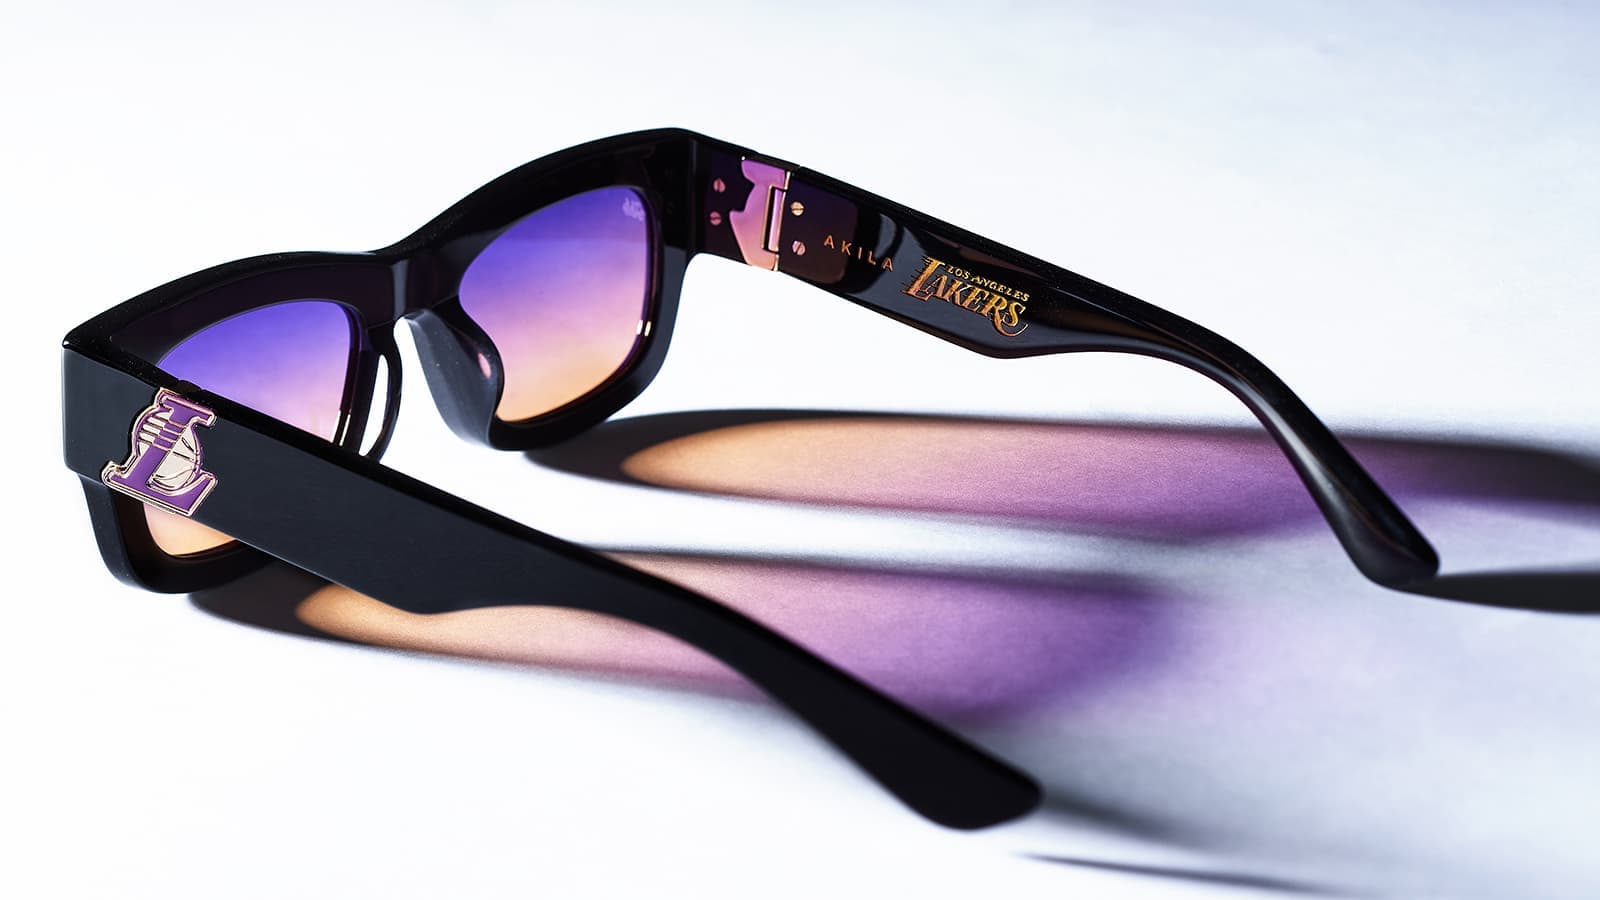 AKILA's sunglasses in collaboration with the NBA are hot!